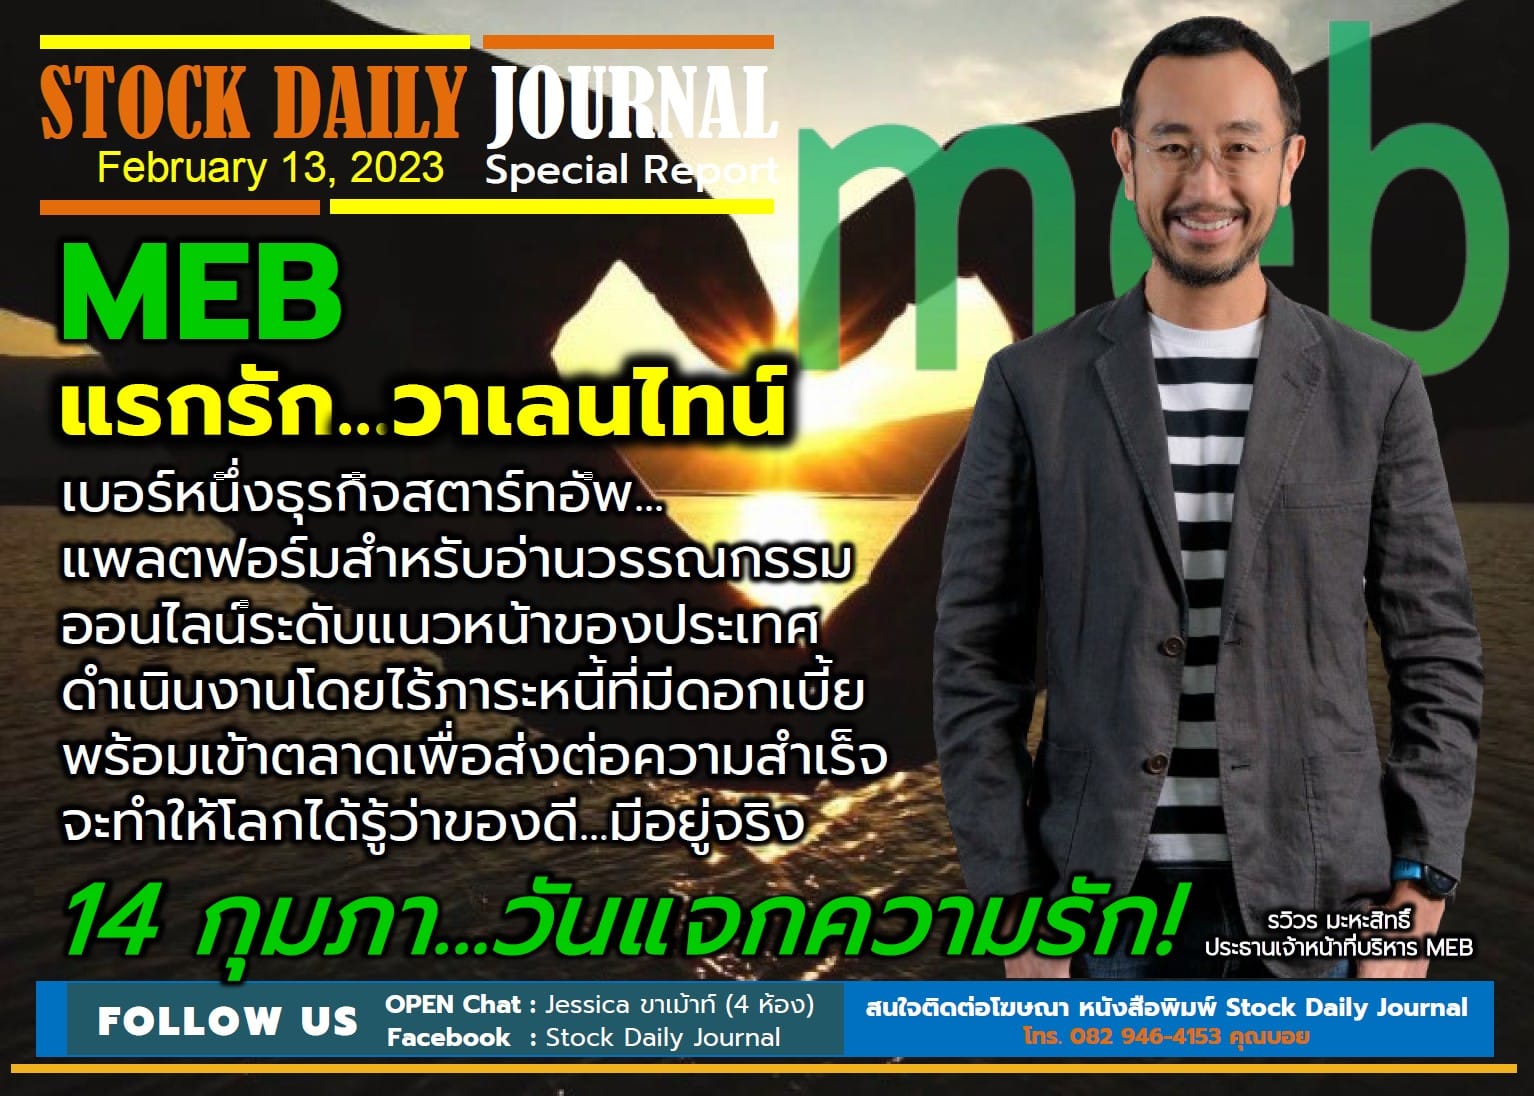 STOCK DAILY JOURNAL “Special Report : MEB”